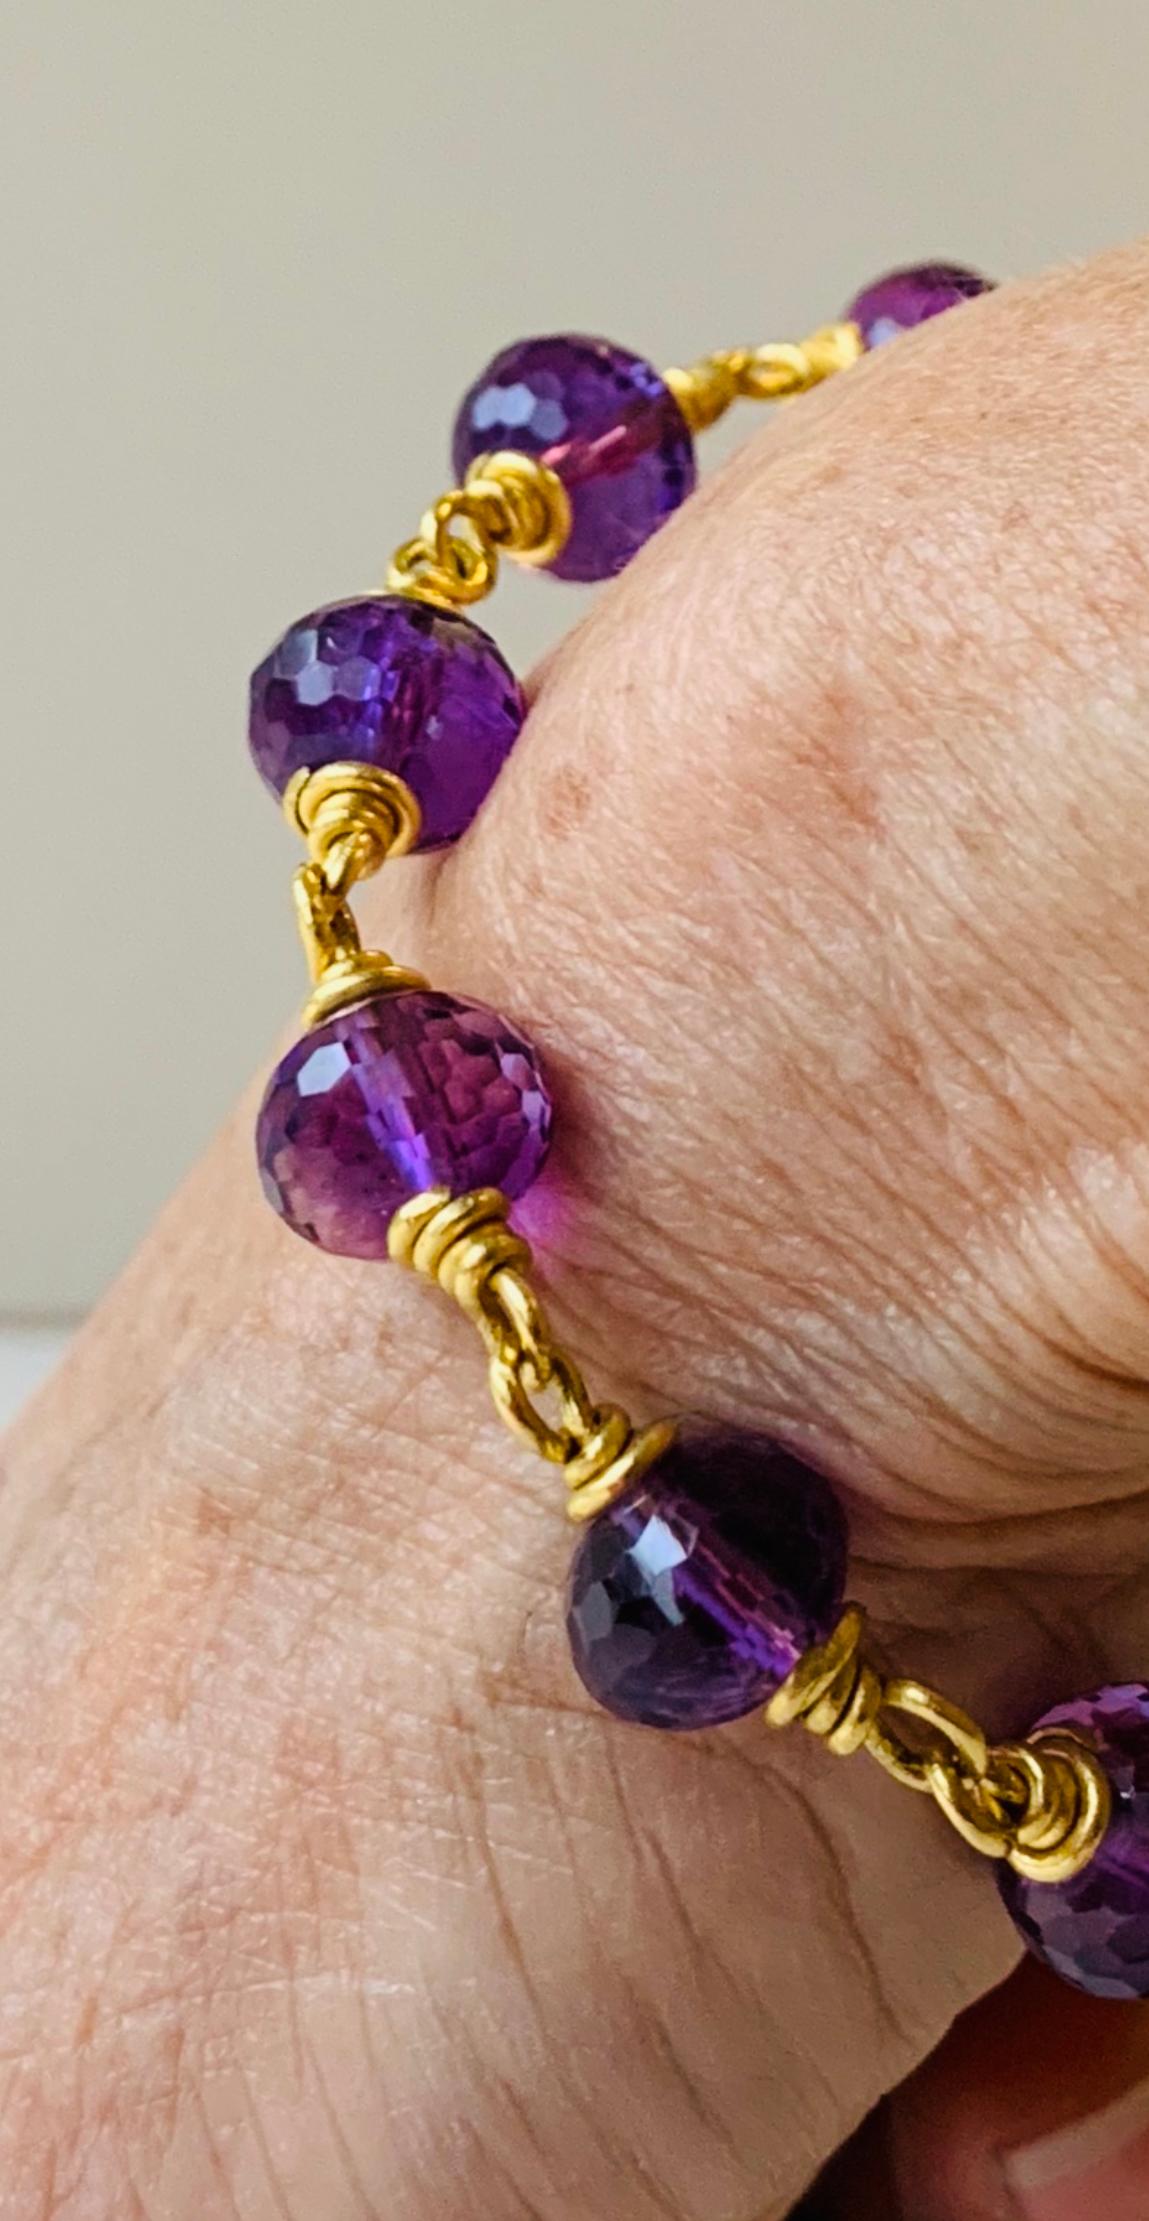 This comfortable and easy to wear  bracelet is in 22 Karat gold with toggle clasp & 3/8 inch amethyst beads. The beads are faceted, very lively and clean. 
Handmade by the artist in New York .
